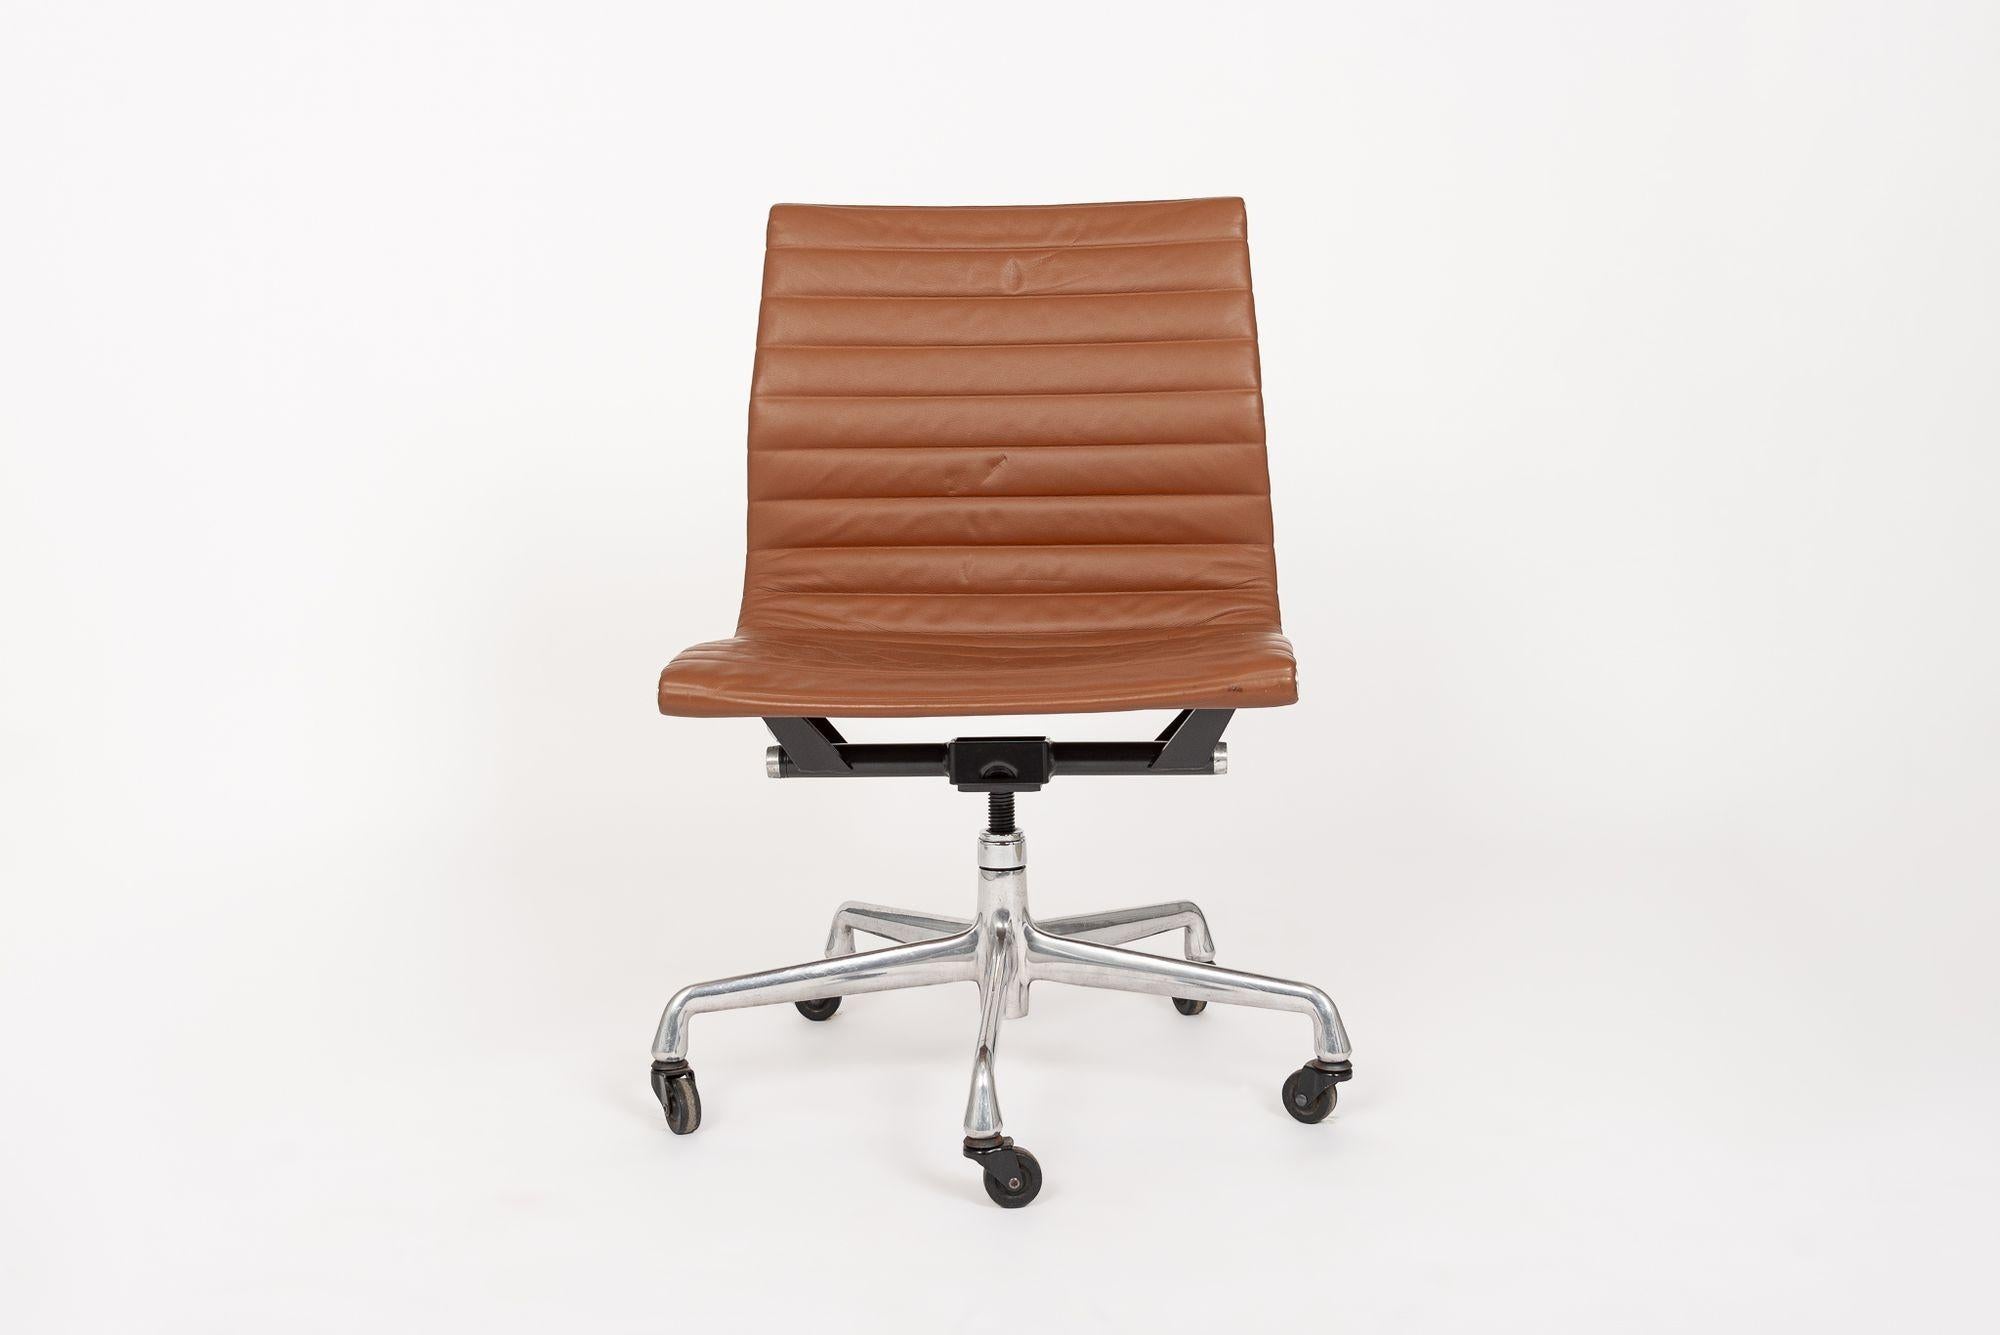 The Aluminum Group Thin Pad Management side office chair designed by Charles & Ray Eames for Herman Miller is from the Eames Aluminum Group Collection. These distinctive chairs resulted from the Eames's experimentation with aluminum, which became